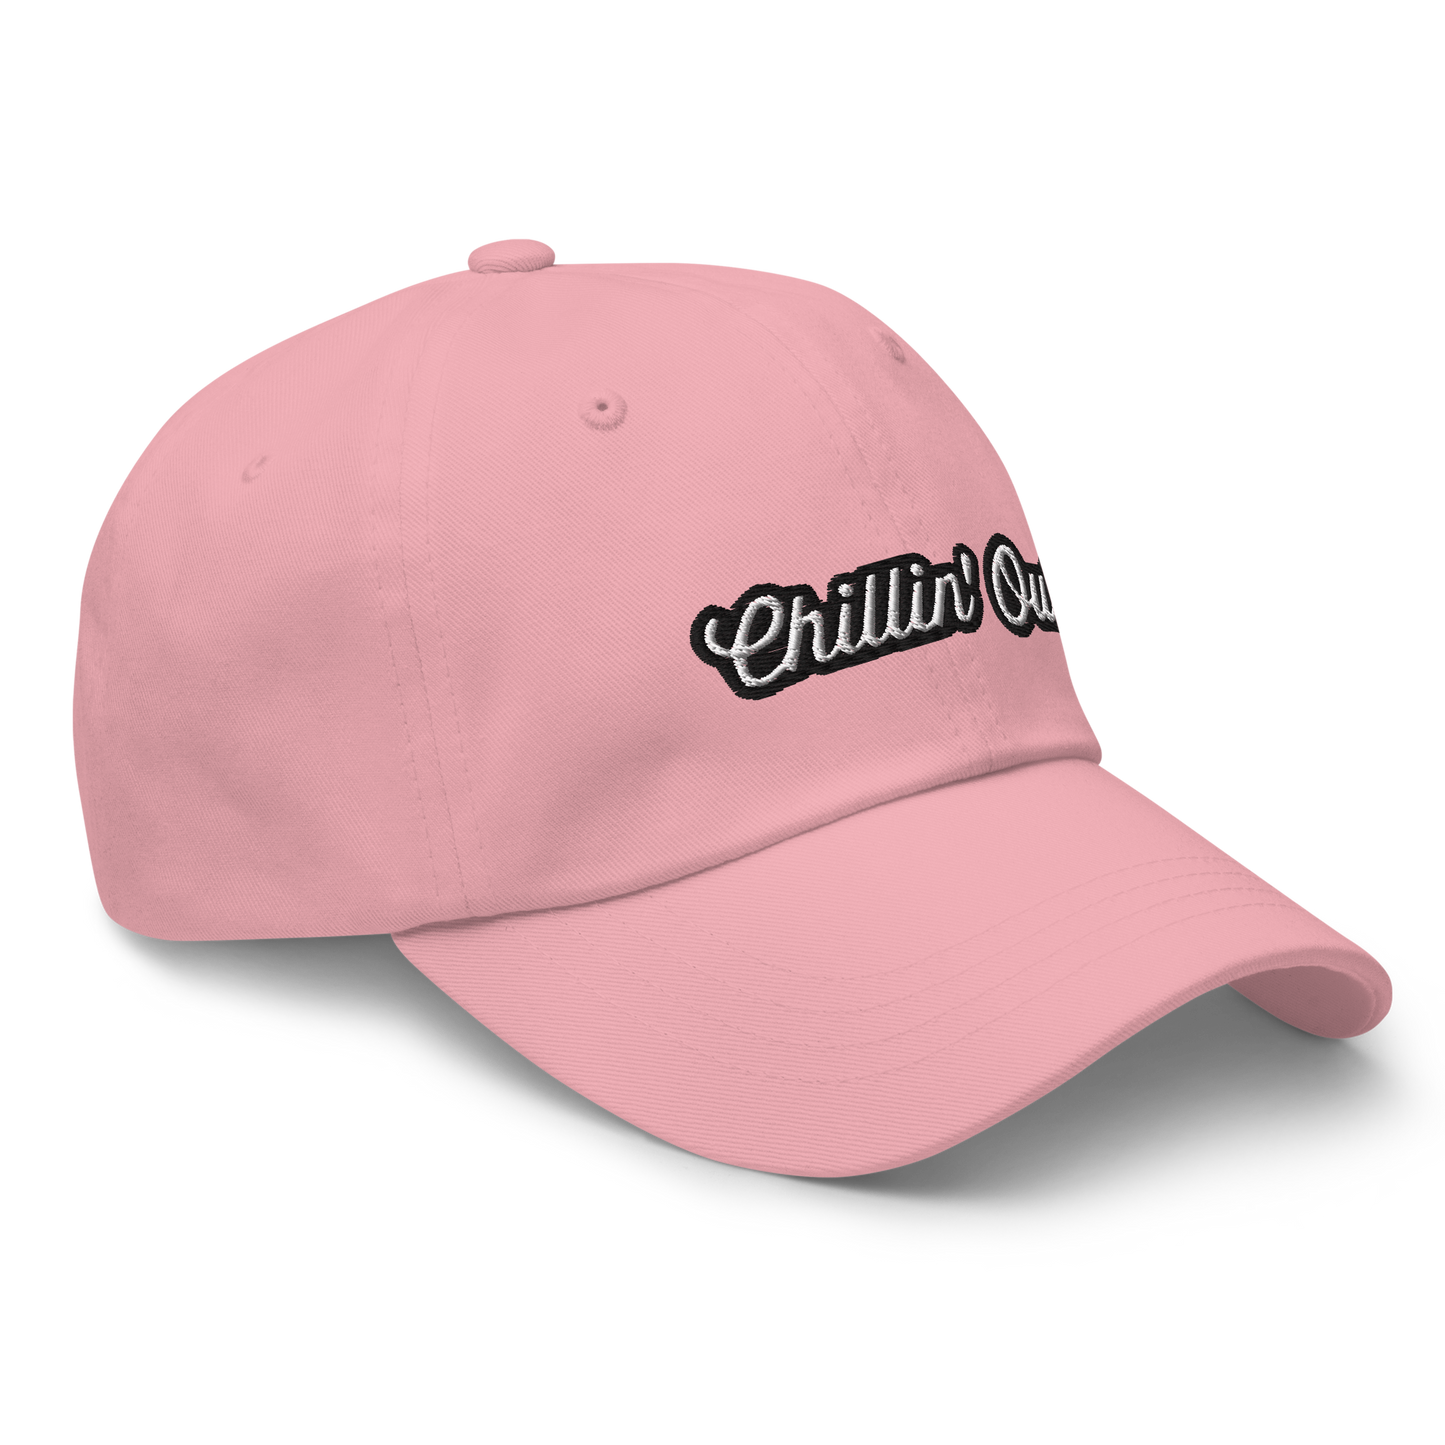 Chillin’ Out hat